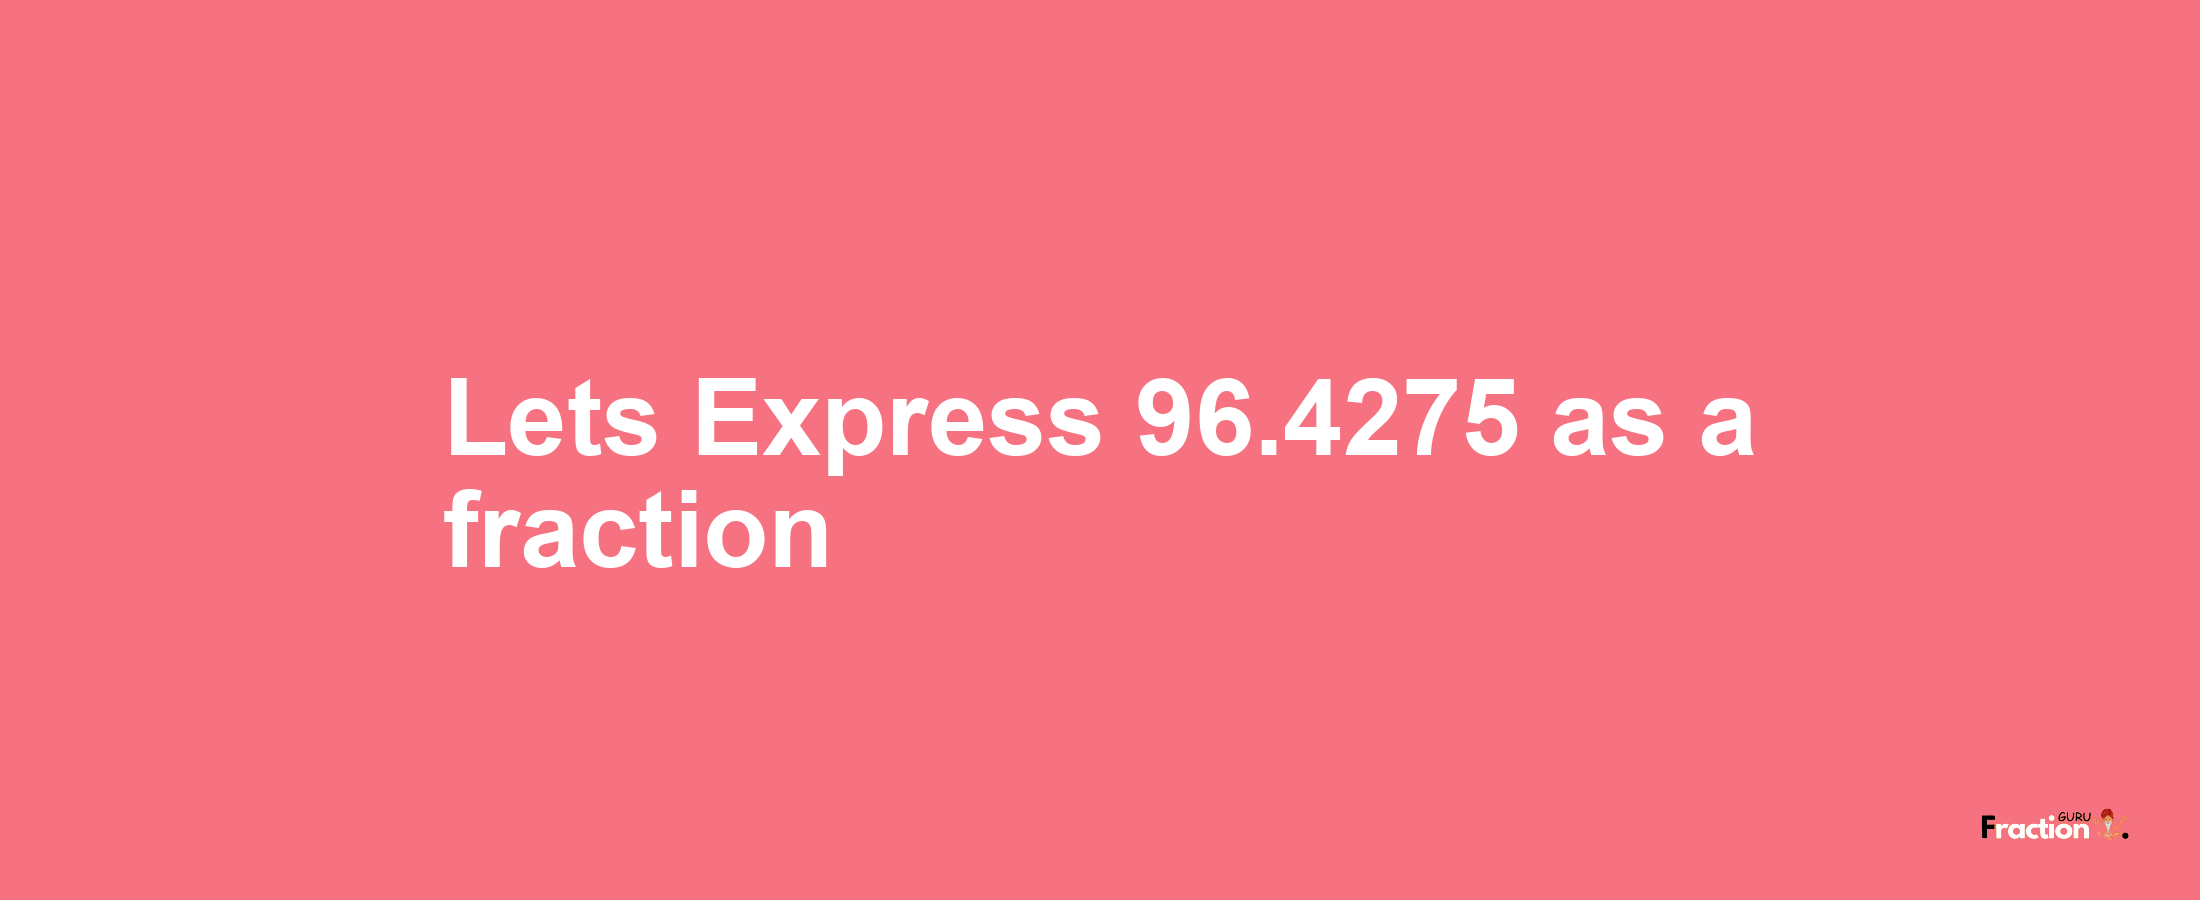 Lets Express 96.4275 as afraction